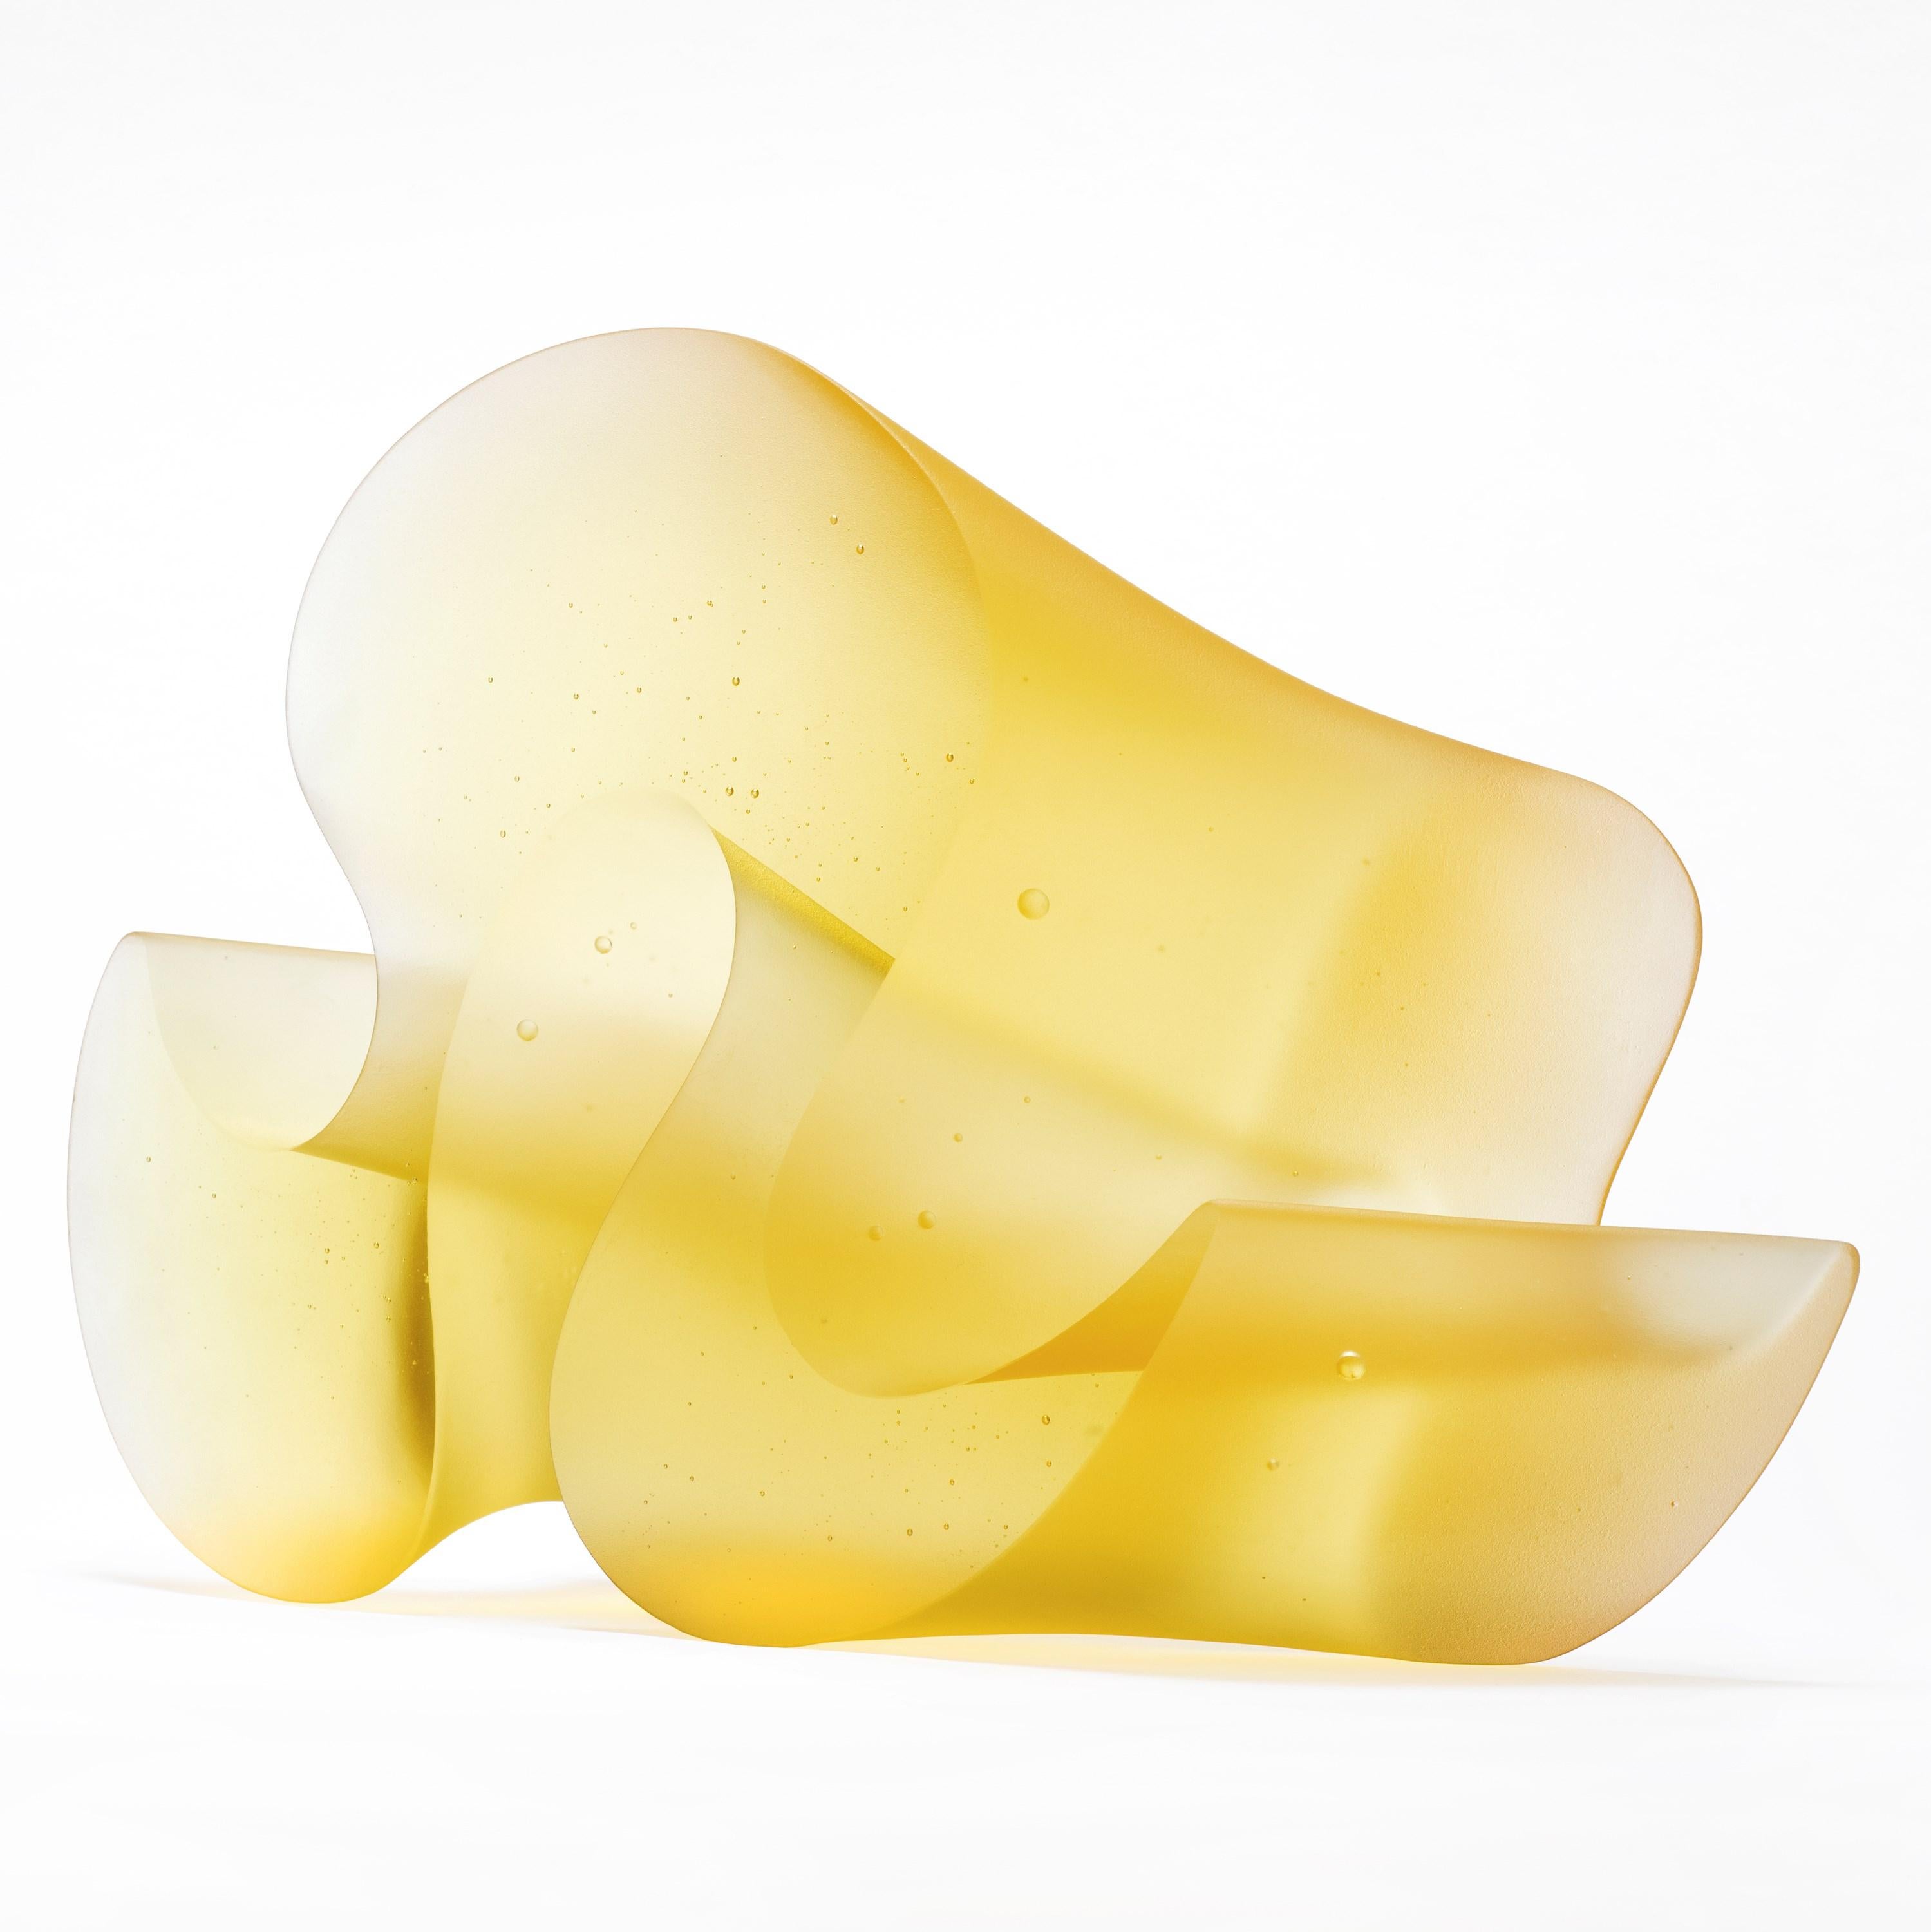 Flow Yellow, a Bright Gold / Yellow Solid Cast Glass Sculpture by Karin Mørch For Sale 1